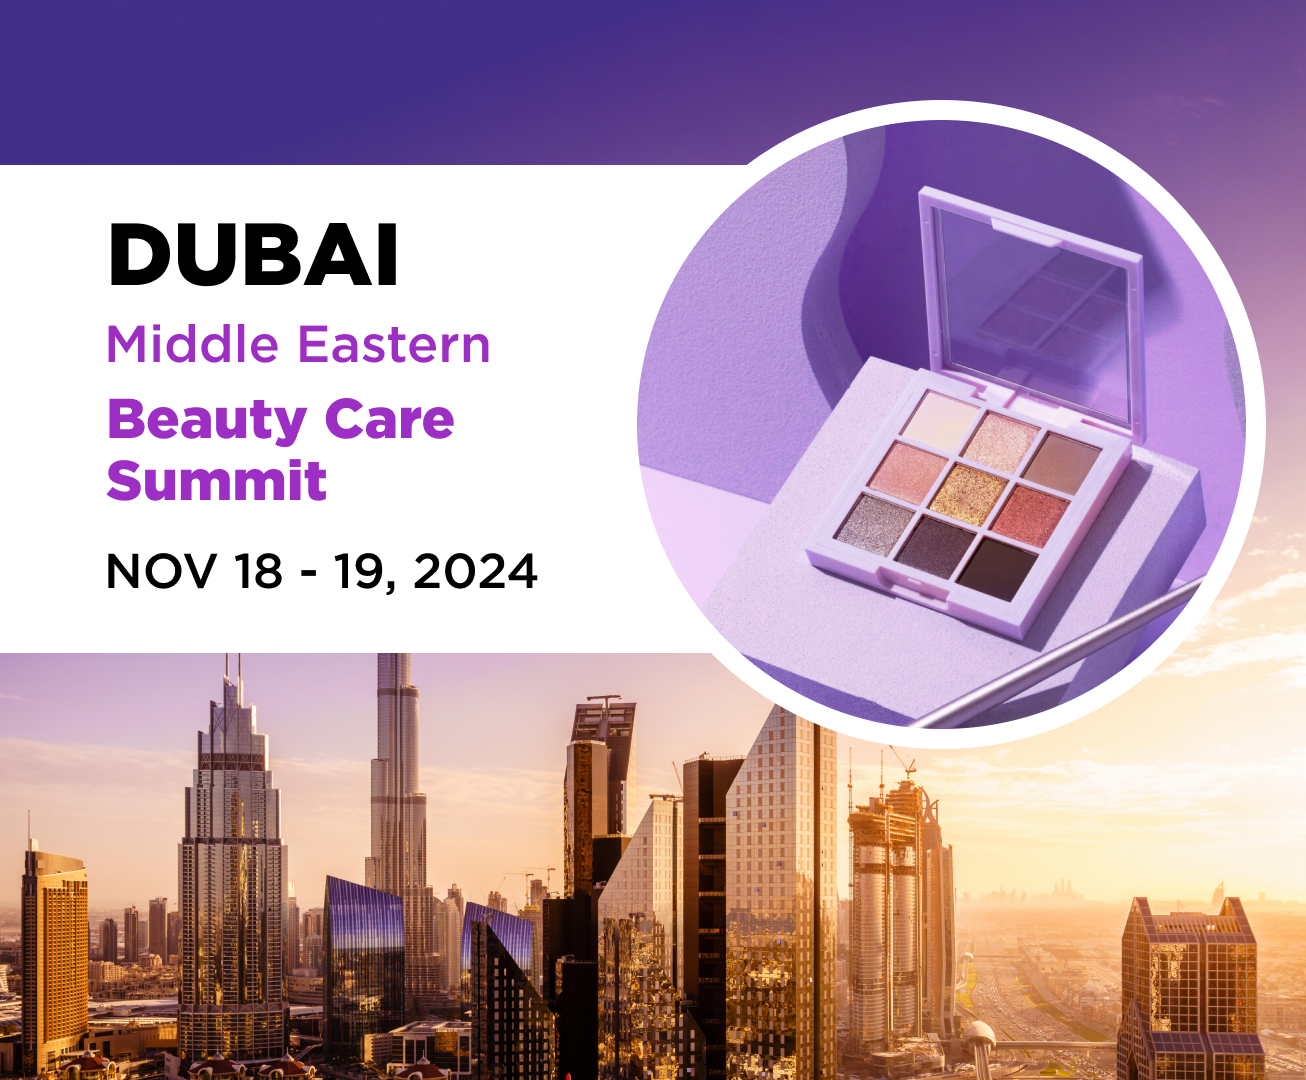 MIDDLE EASTERN BEAUTY CARE SUMMIT